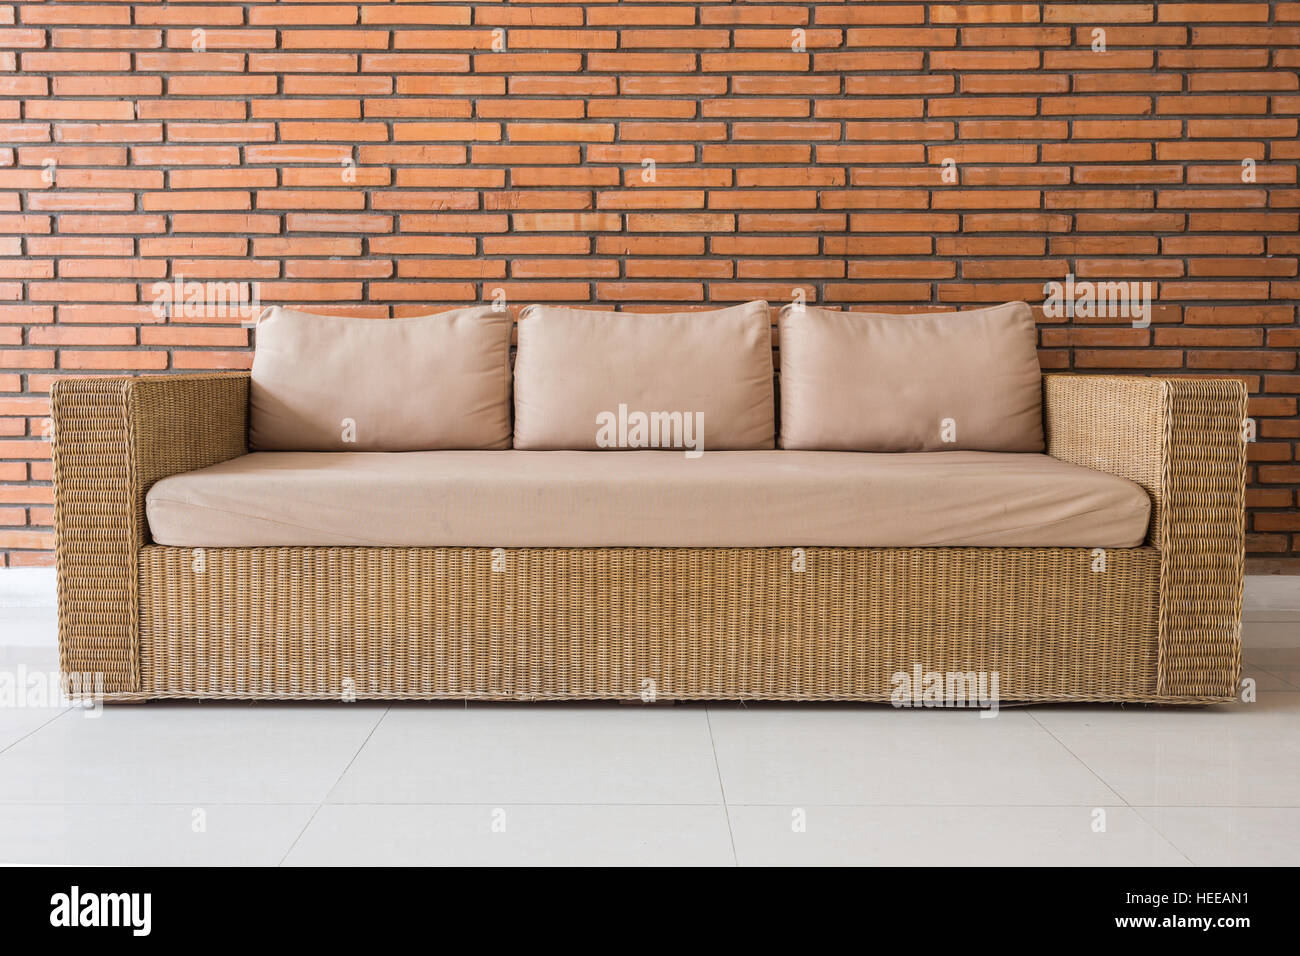 https://c8.alamy.com/comp/HEEAN1/rattan-sofa-with-grey-cushions-and-red-brick-wall-background-HEEAN1.jpg